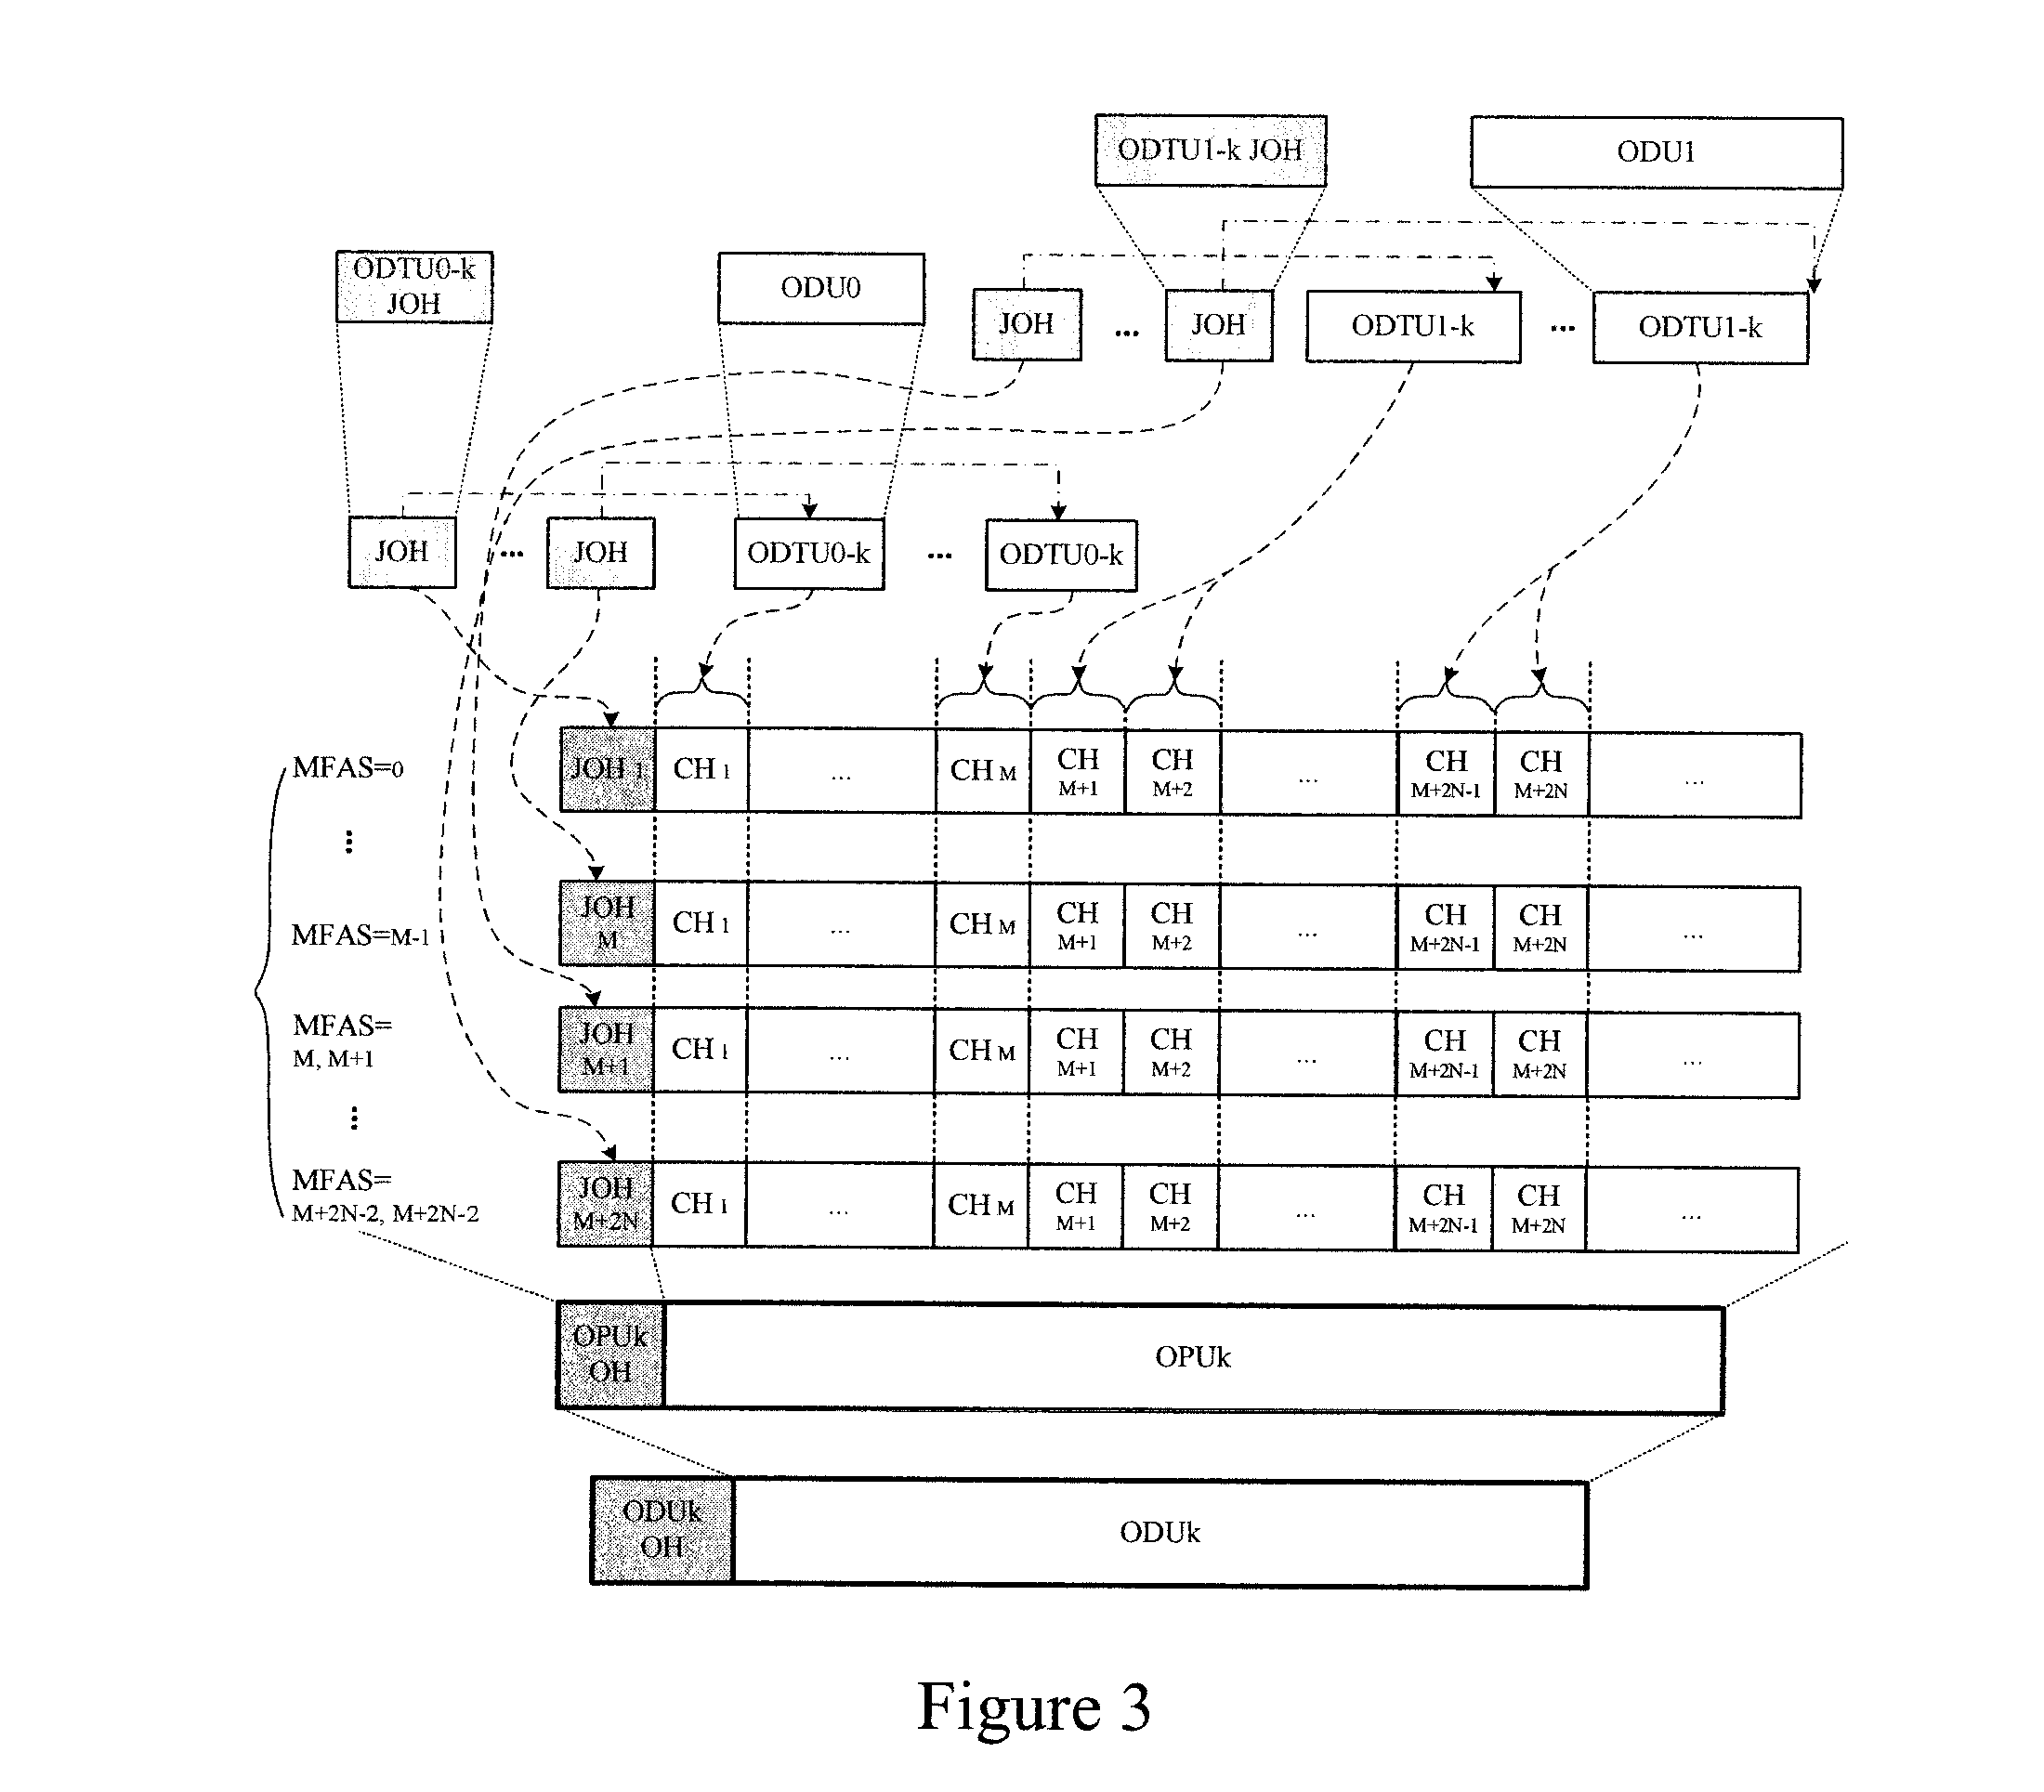 Method and Device for Transmitting Low Rate Signals Over an Optical Transport Network